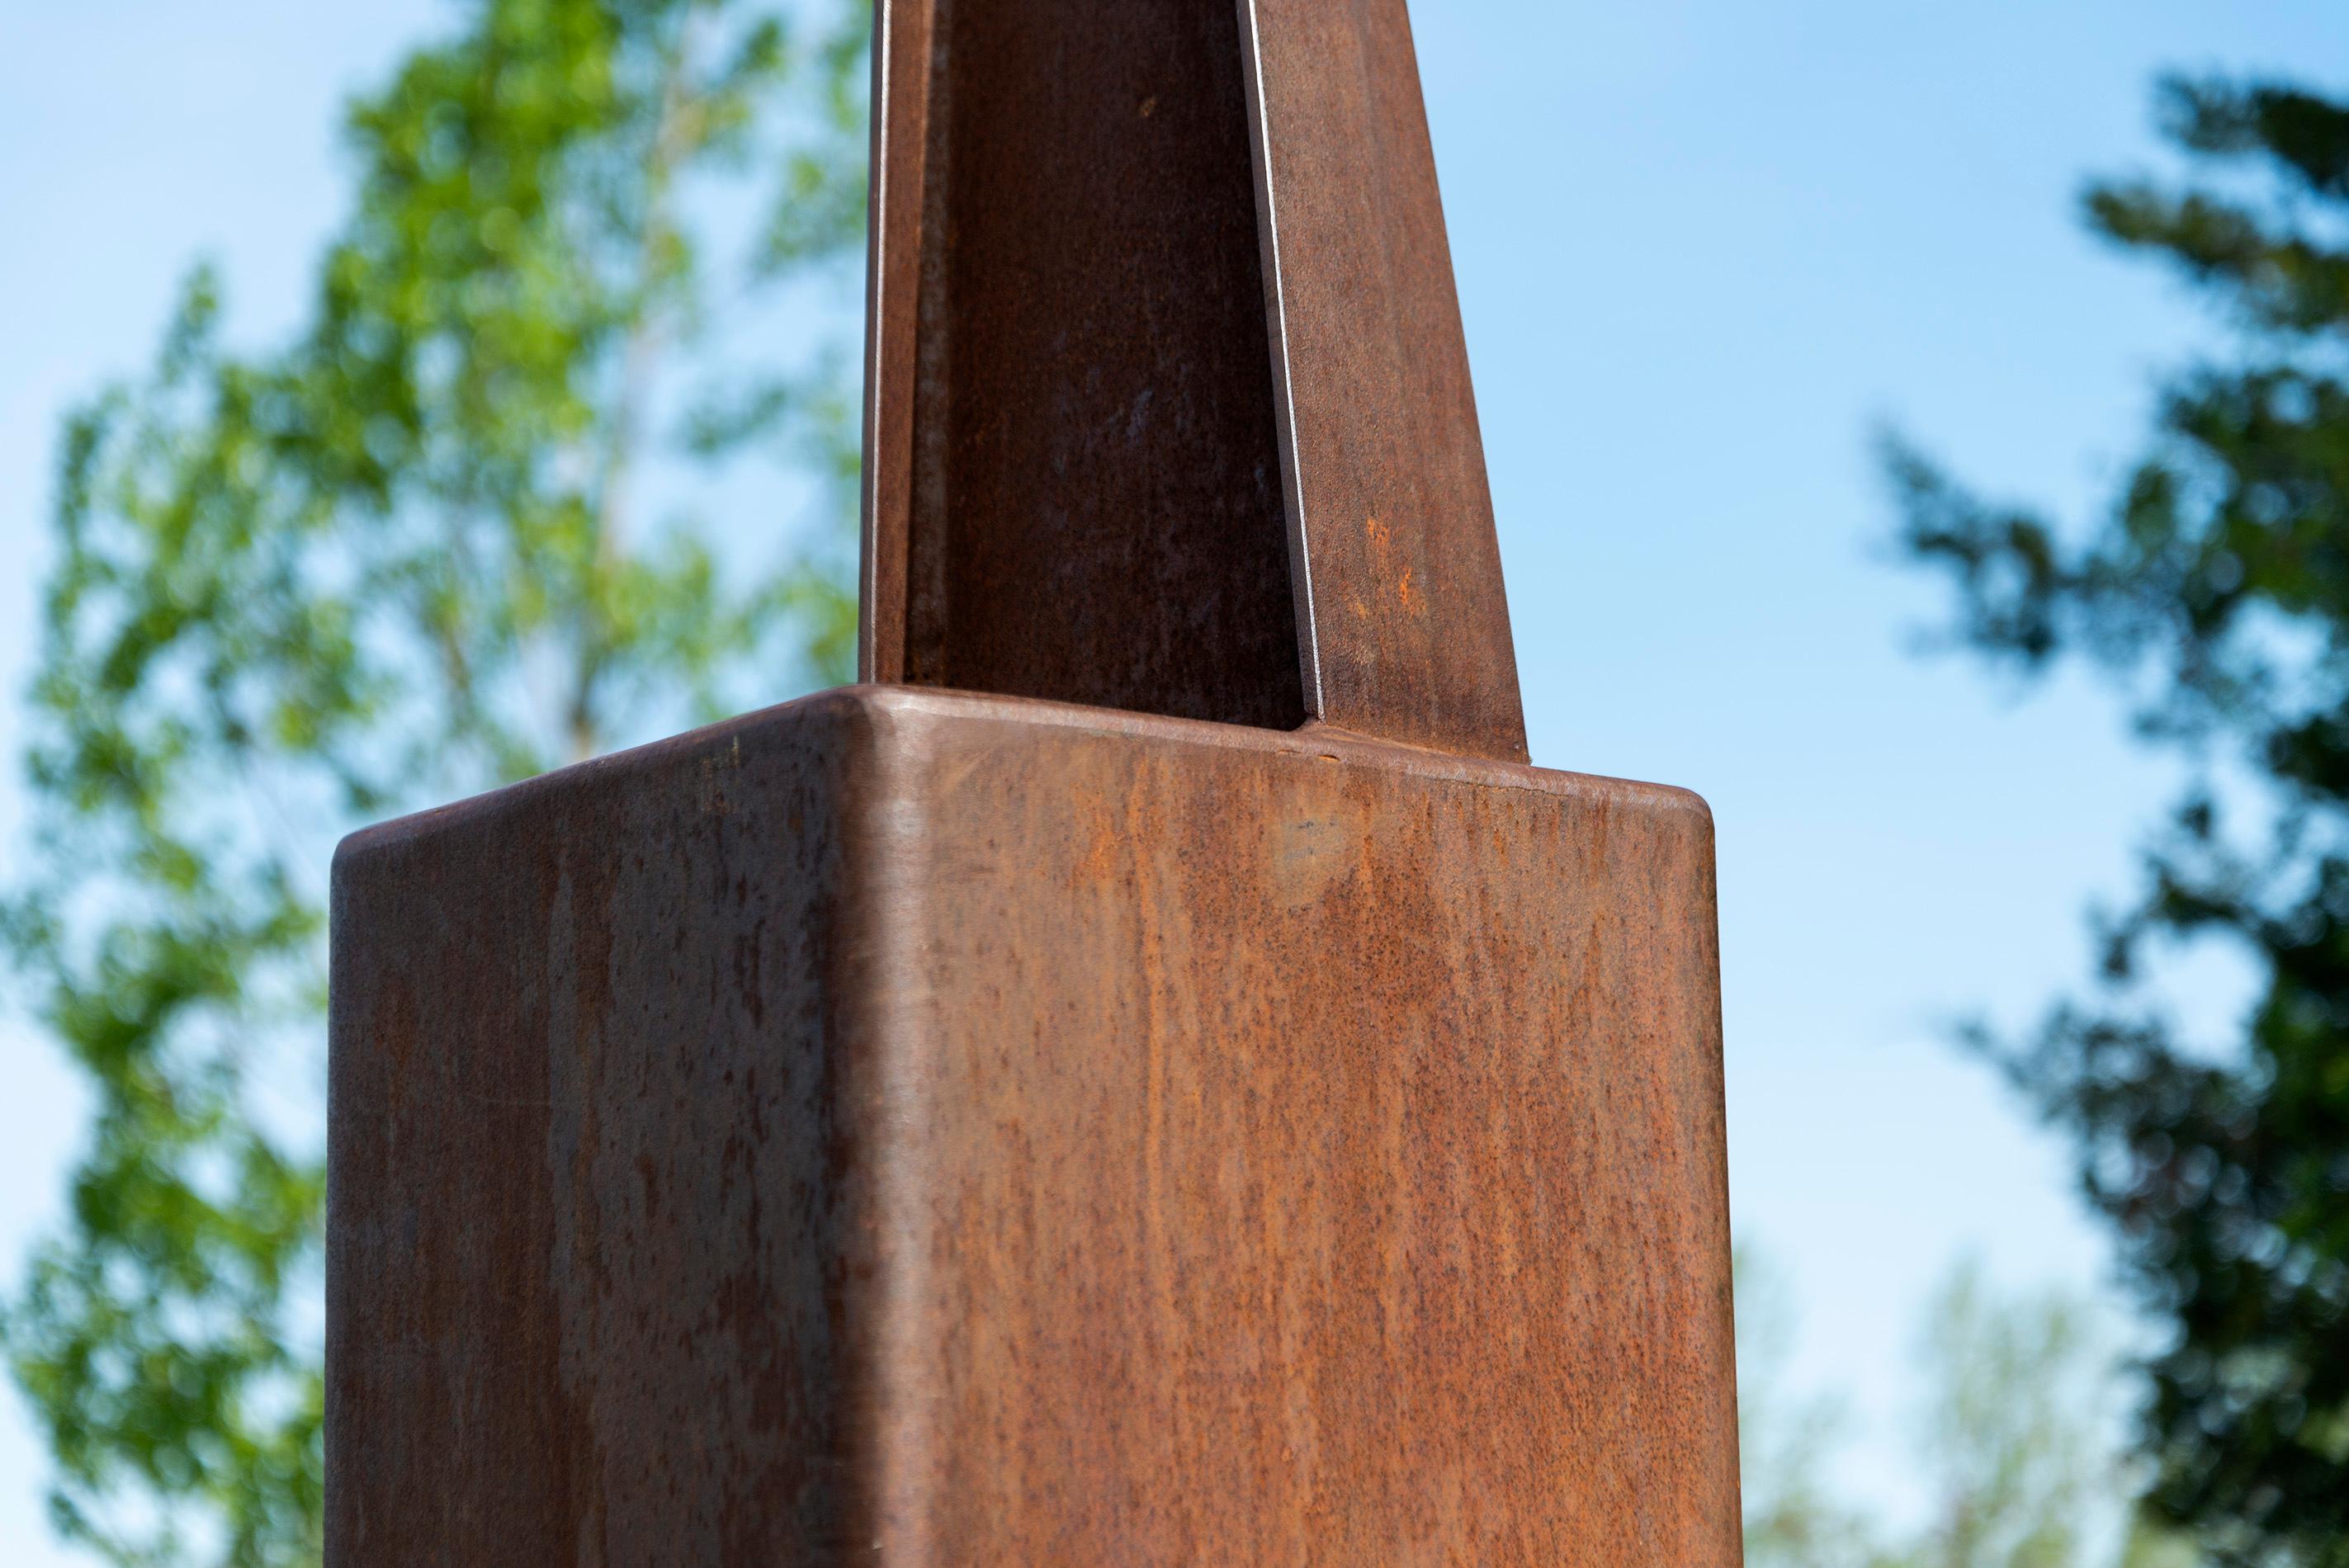 An elegantly curved column of corten steel appears to almost float in mid-air in this arresting outdoor sculpture by Claude Millette. The Quebec artist whose career spans four decades is known for his imaginative abstract work that plays with the